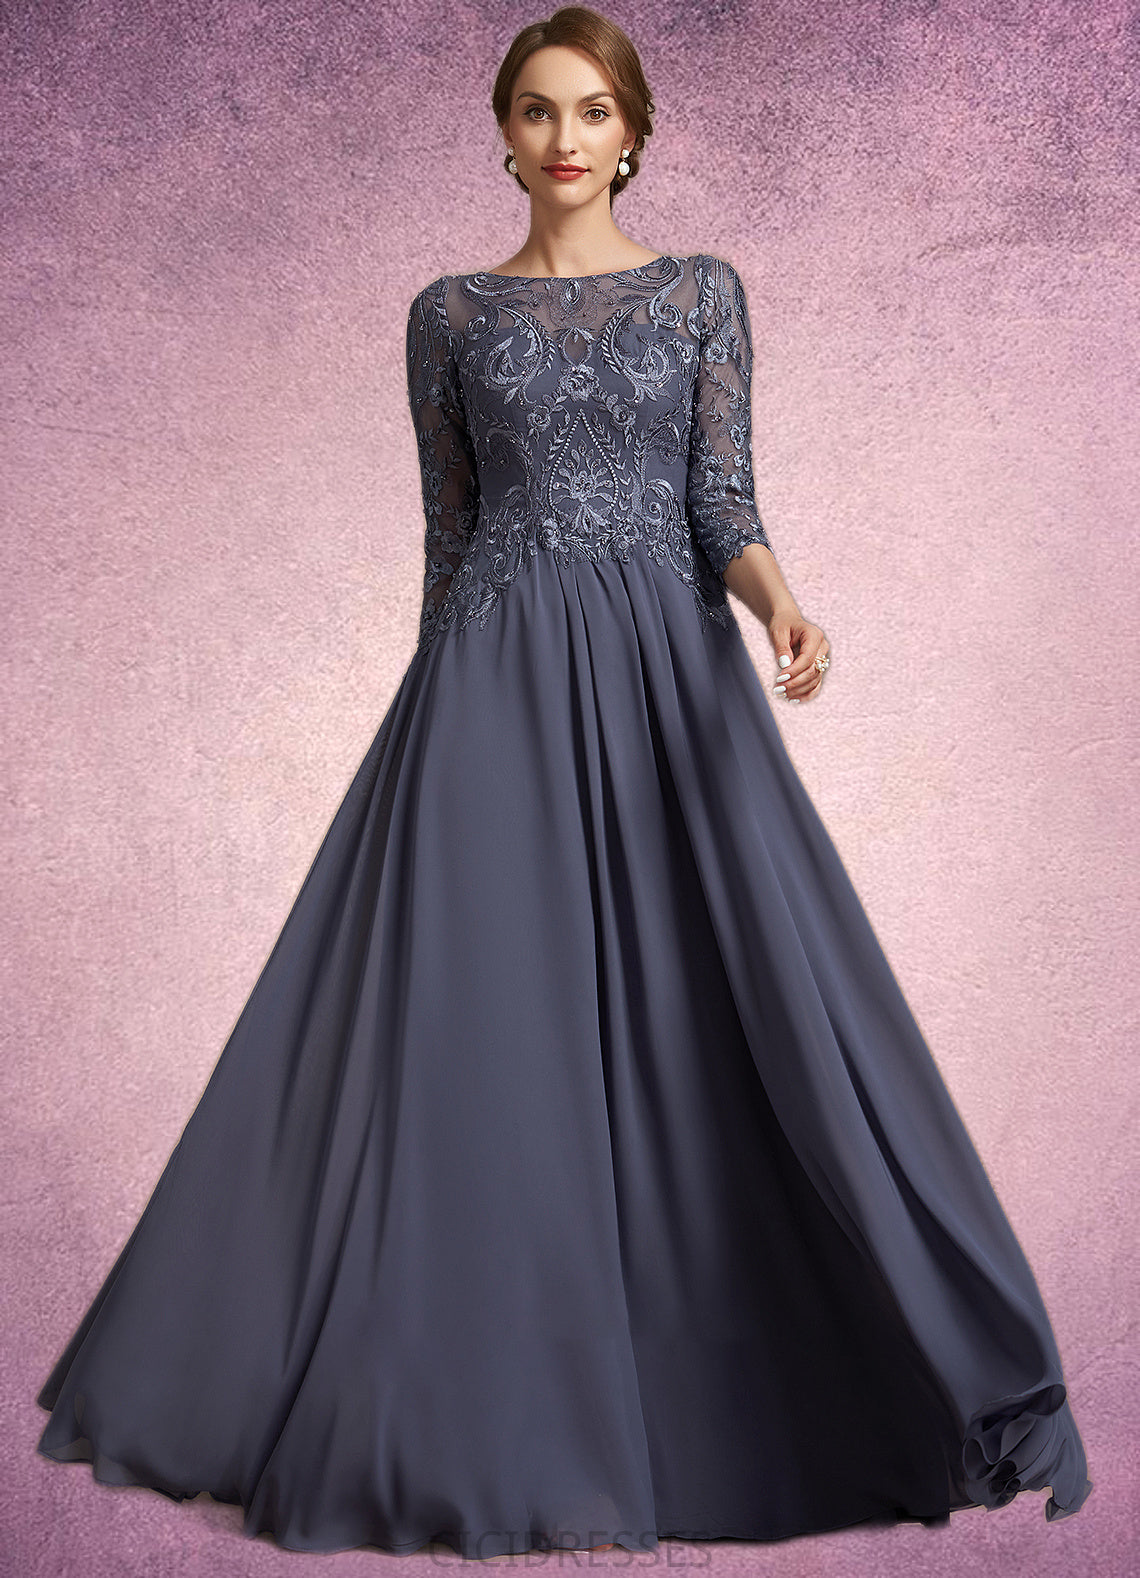 Anahi A-Line Scoop Neck Floor-Length Chiffon Lace Mother of the Bride Dress CIC8126P0014719